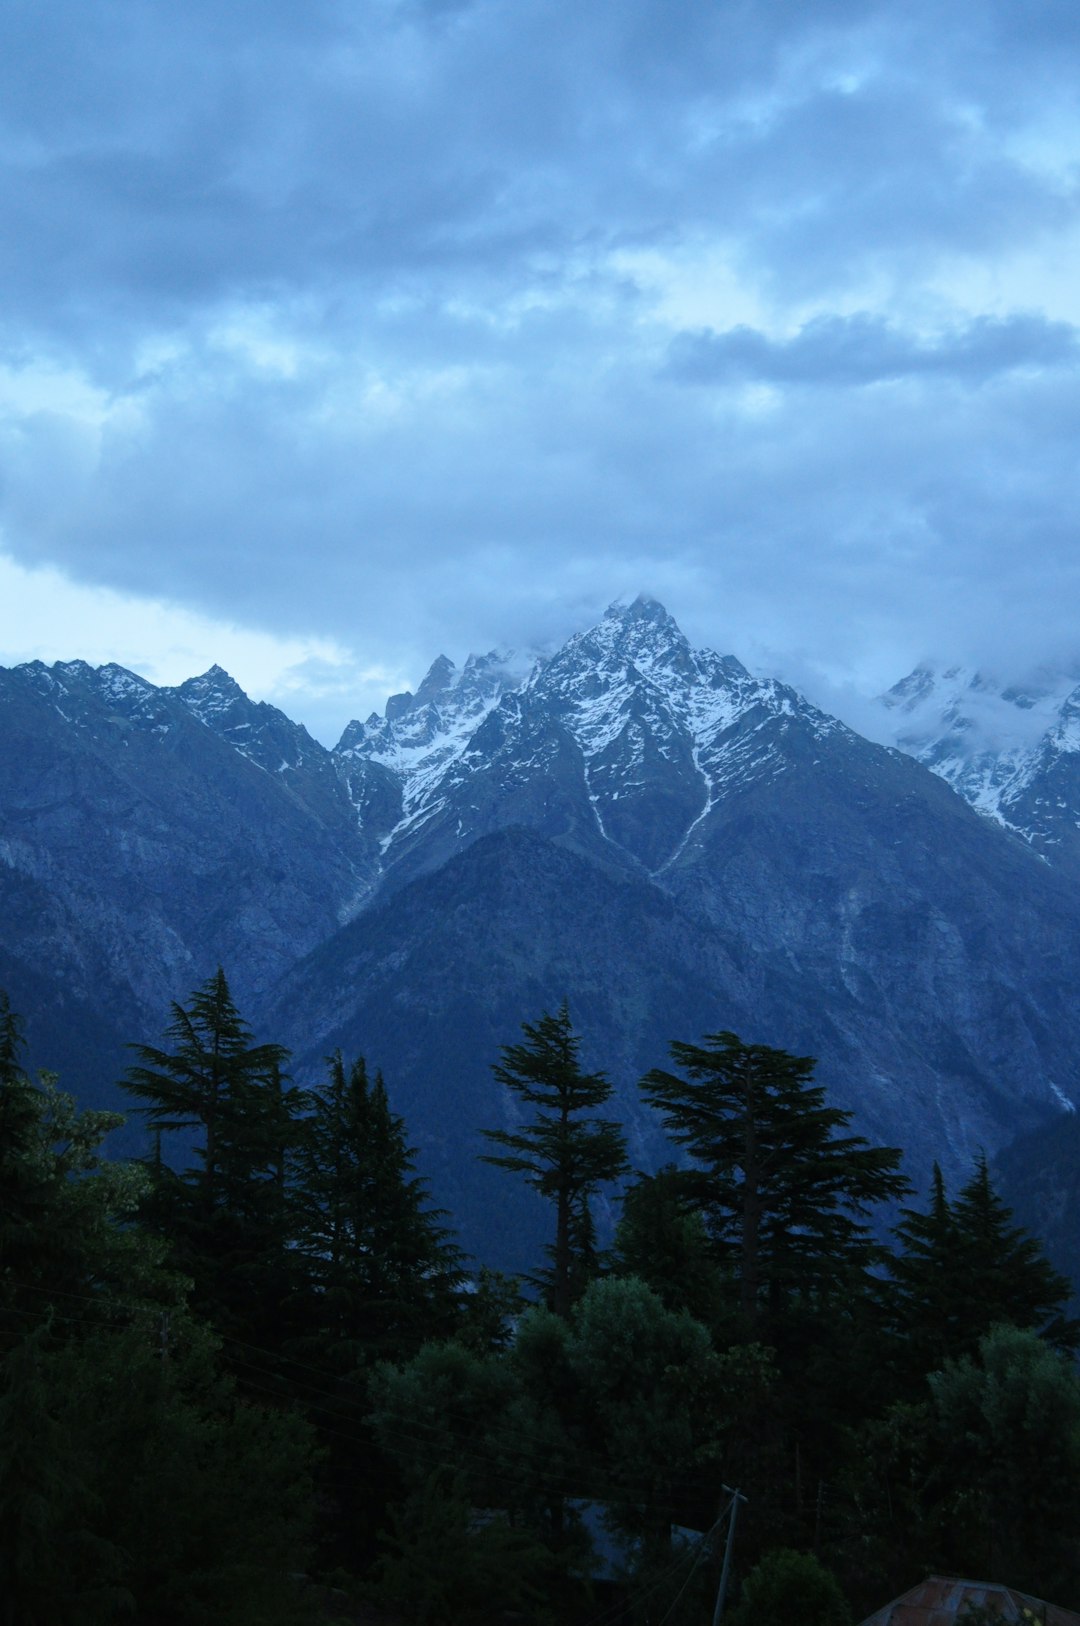 travelers stories about Hill station in Kalpa, India